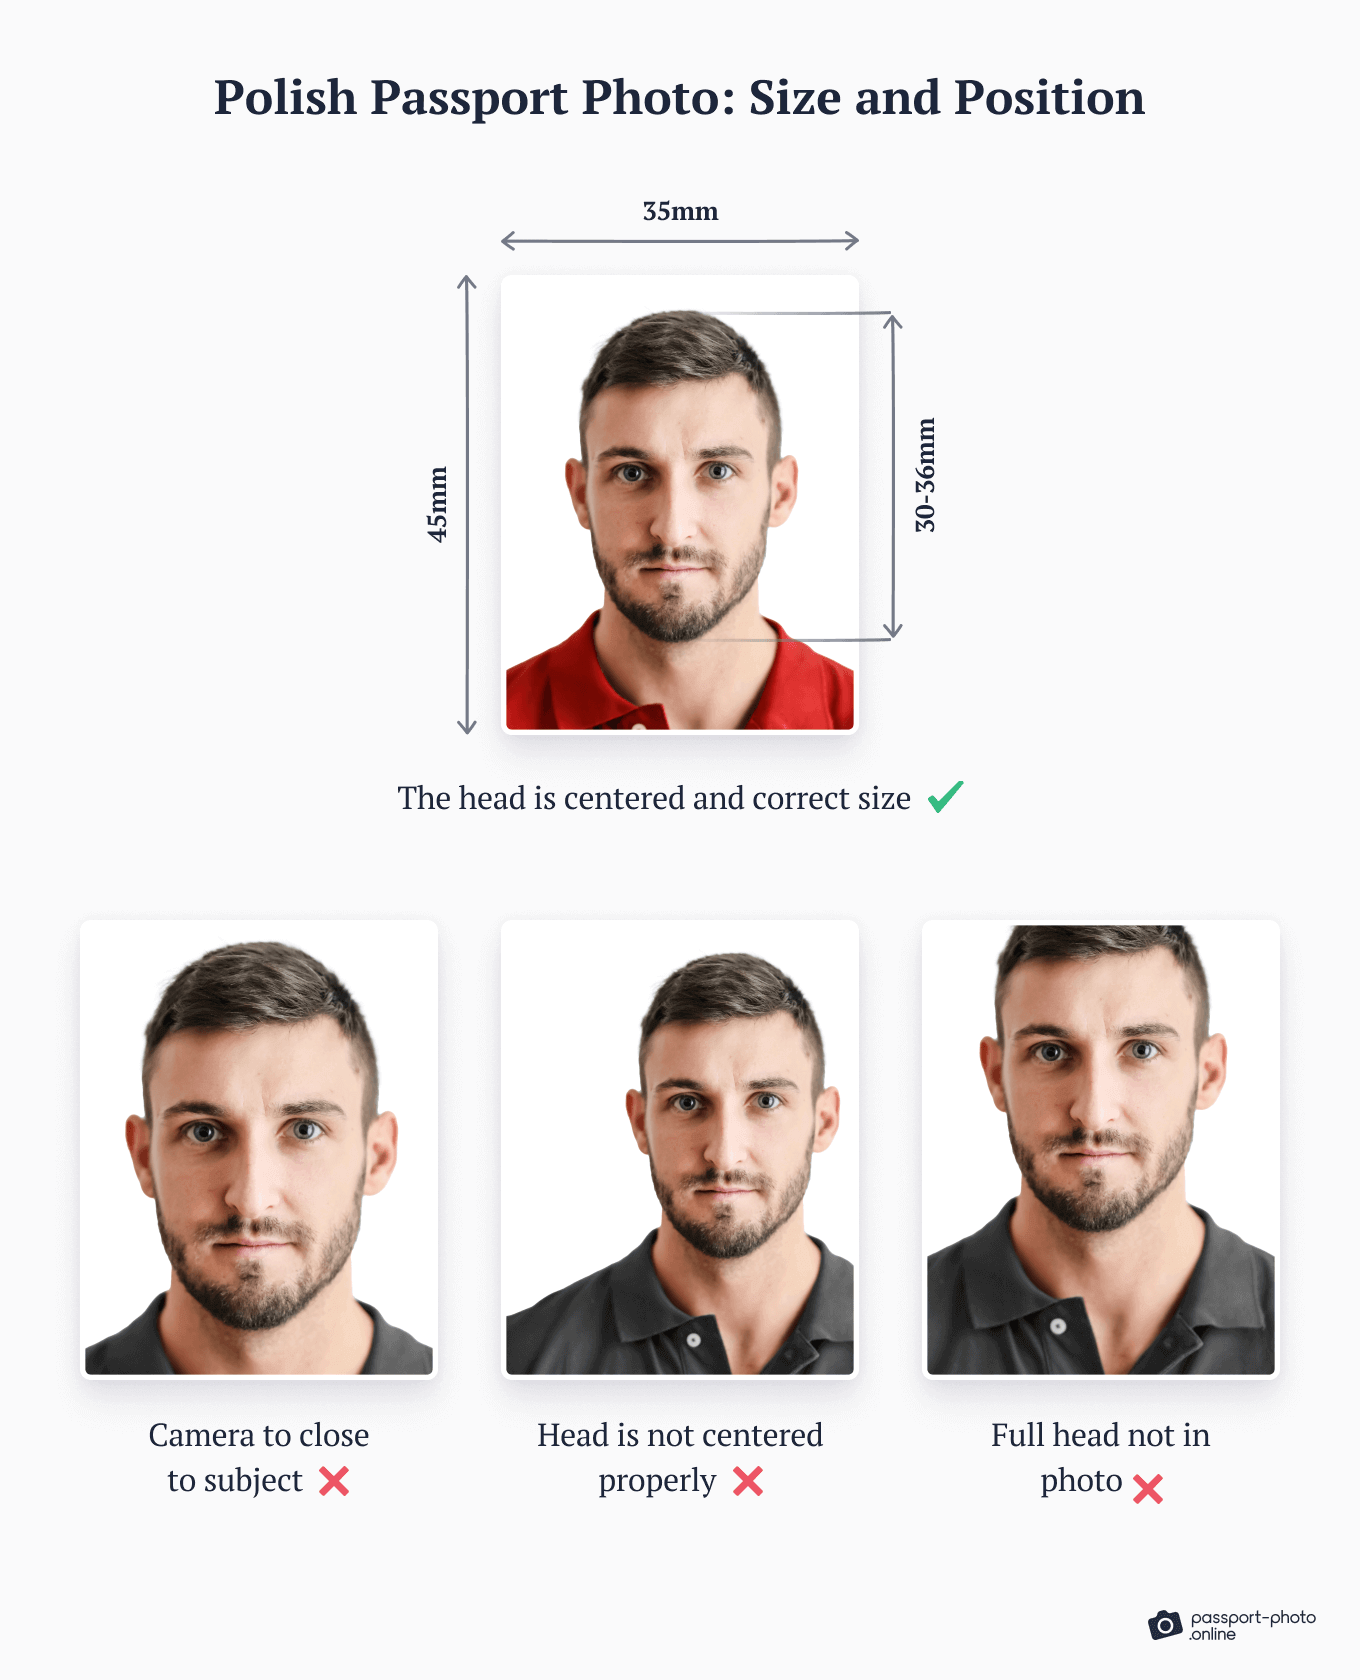 Examples of correct and incorrect positions for passport photos.